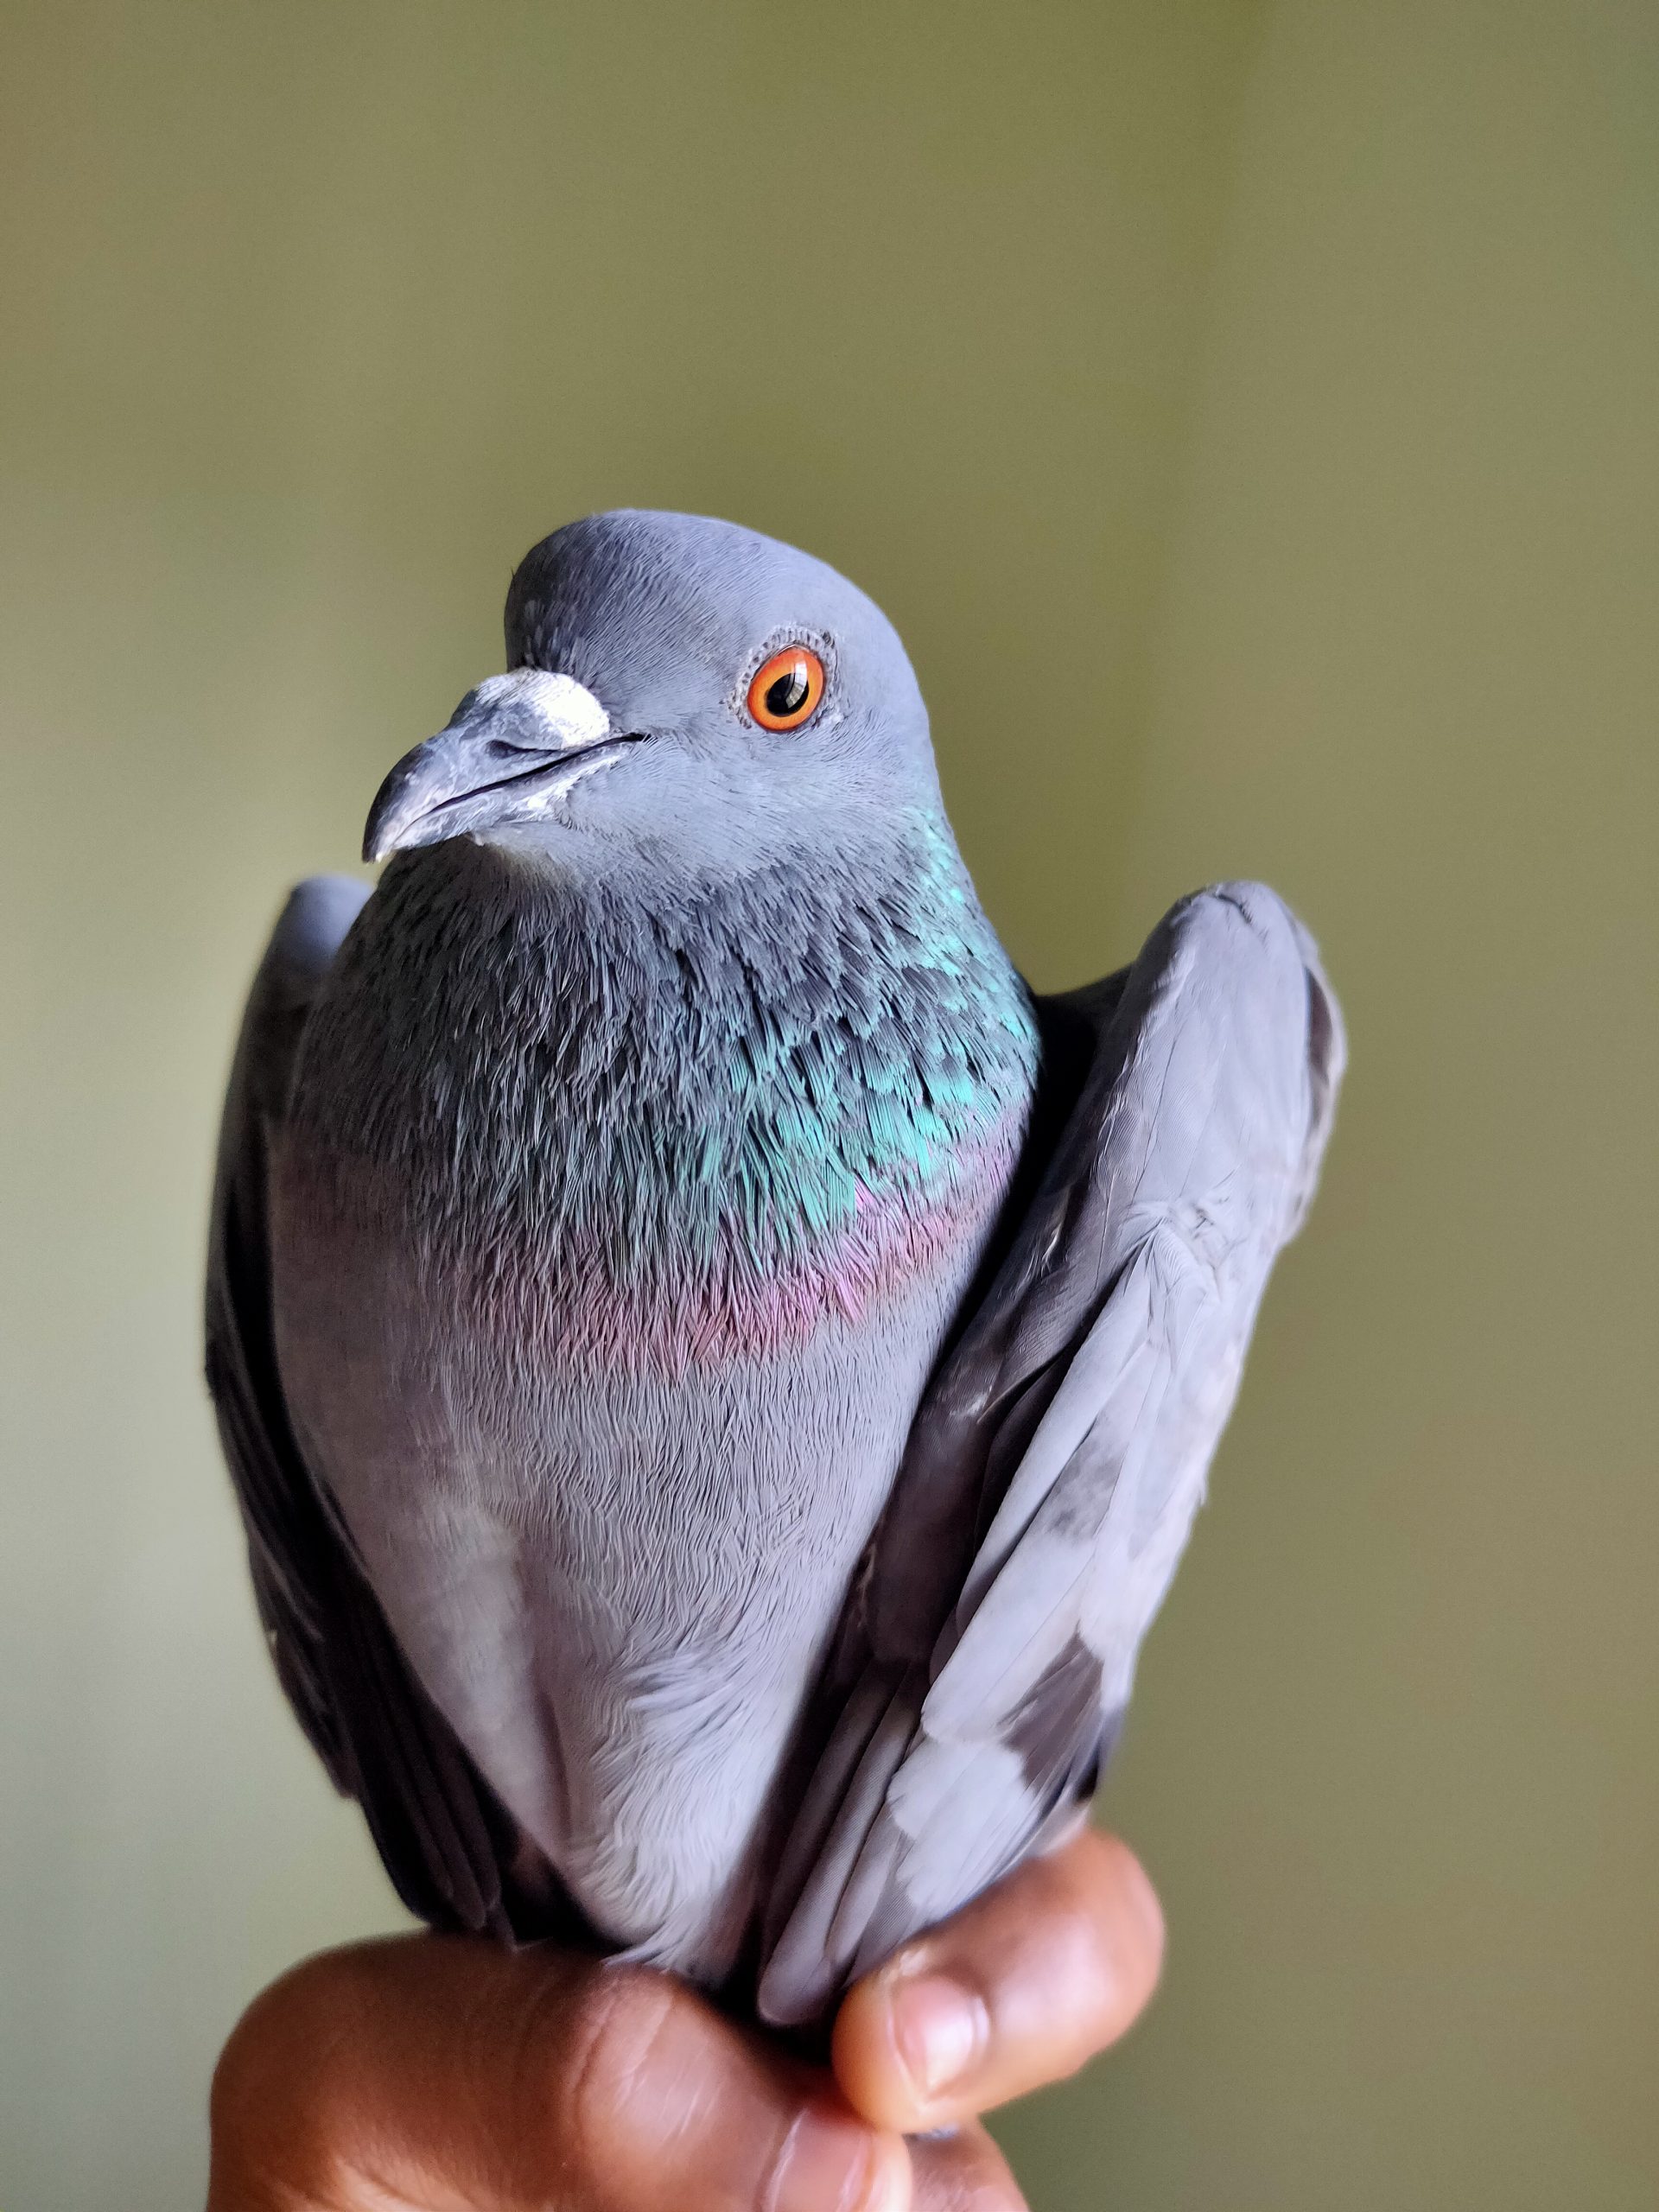 A pigeon in hand